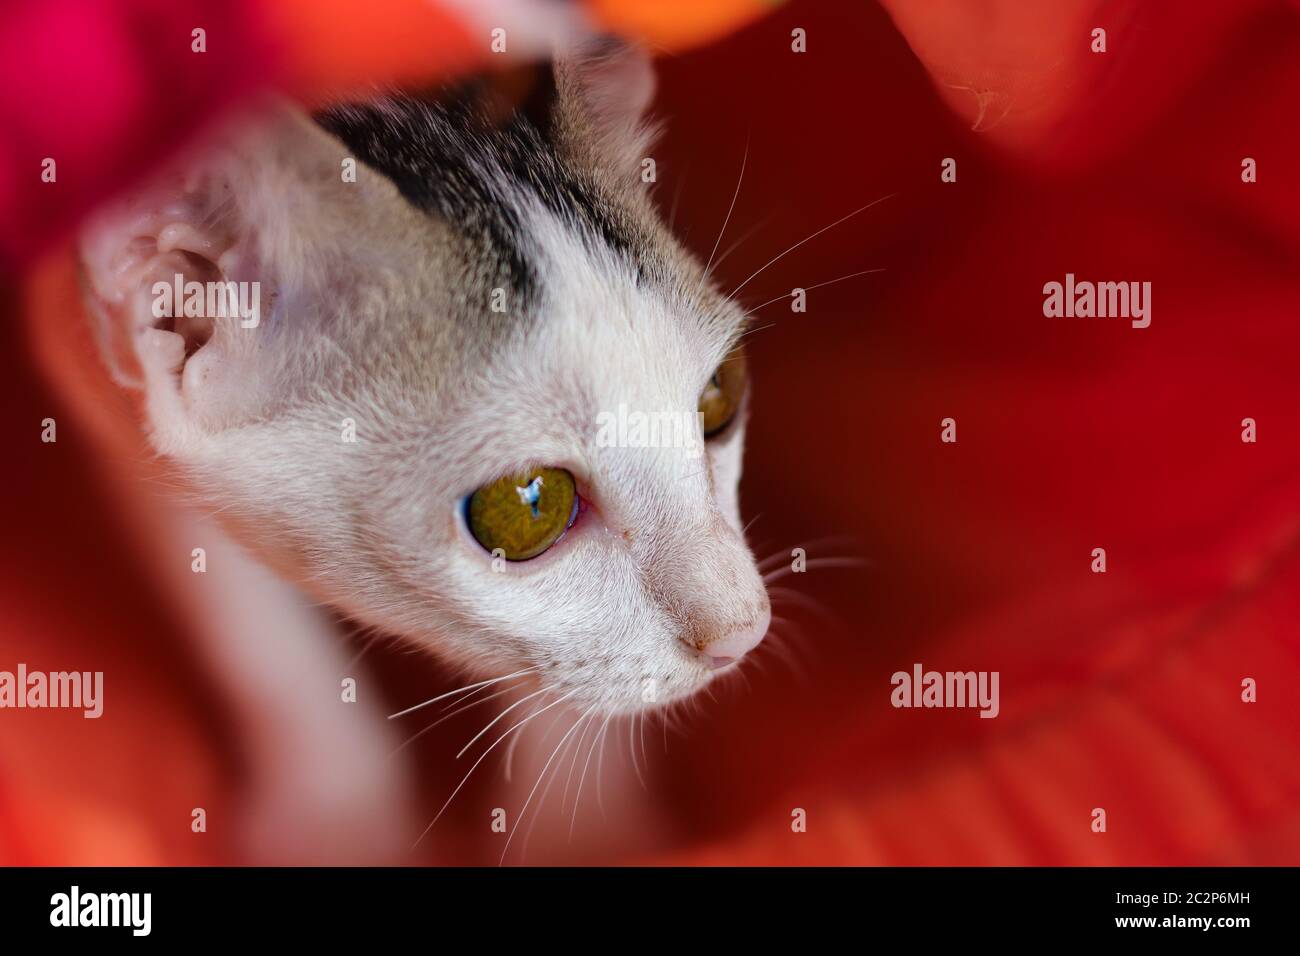 Newly rescued stray cat hiding under an orange mattres showing concept of kindness and promoting  animal welfare Stock Photo